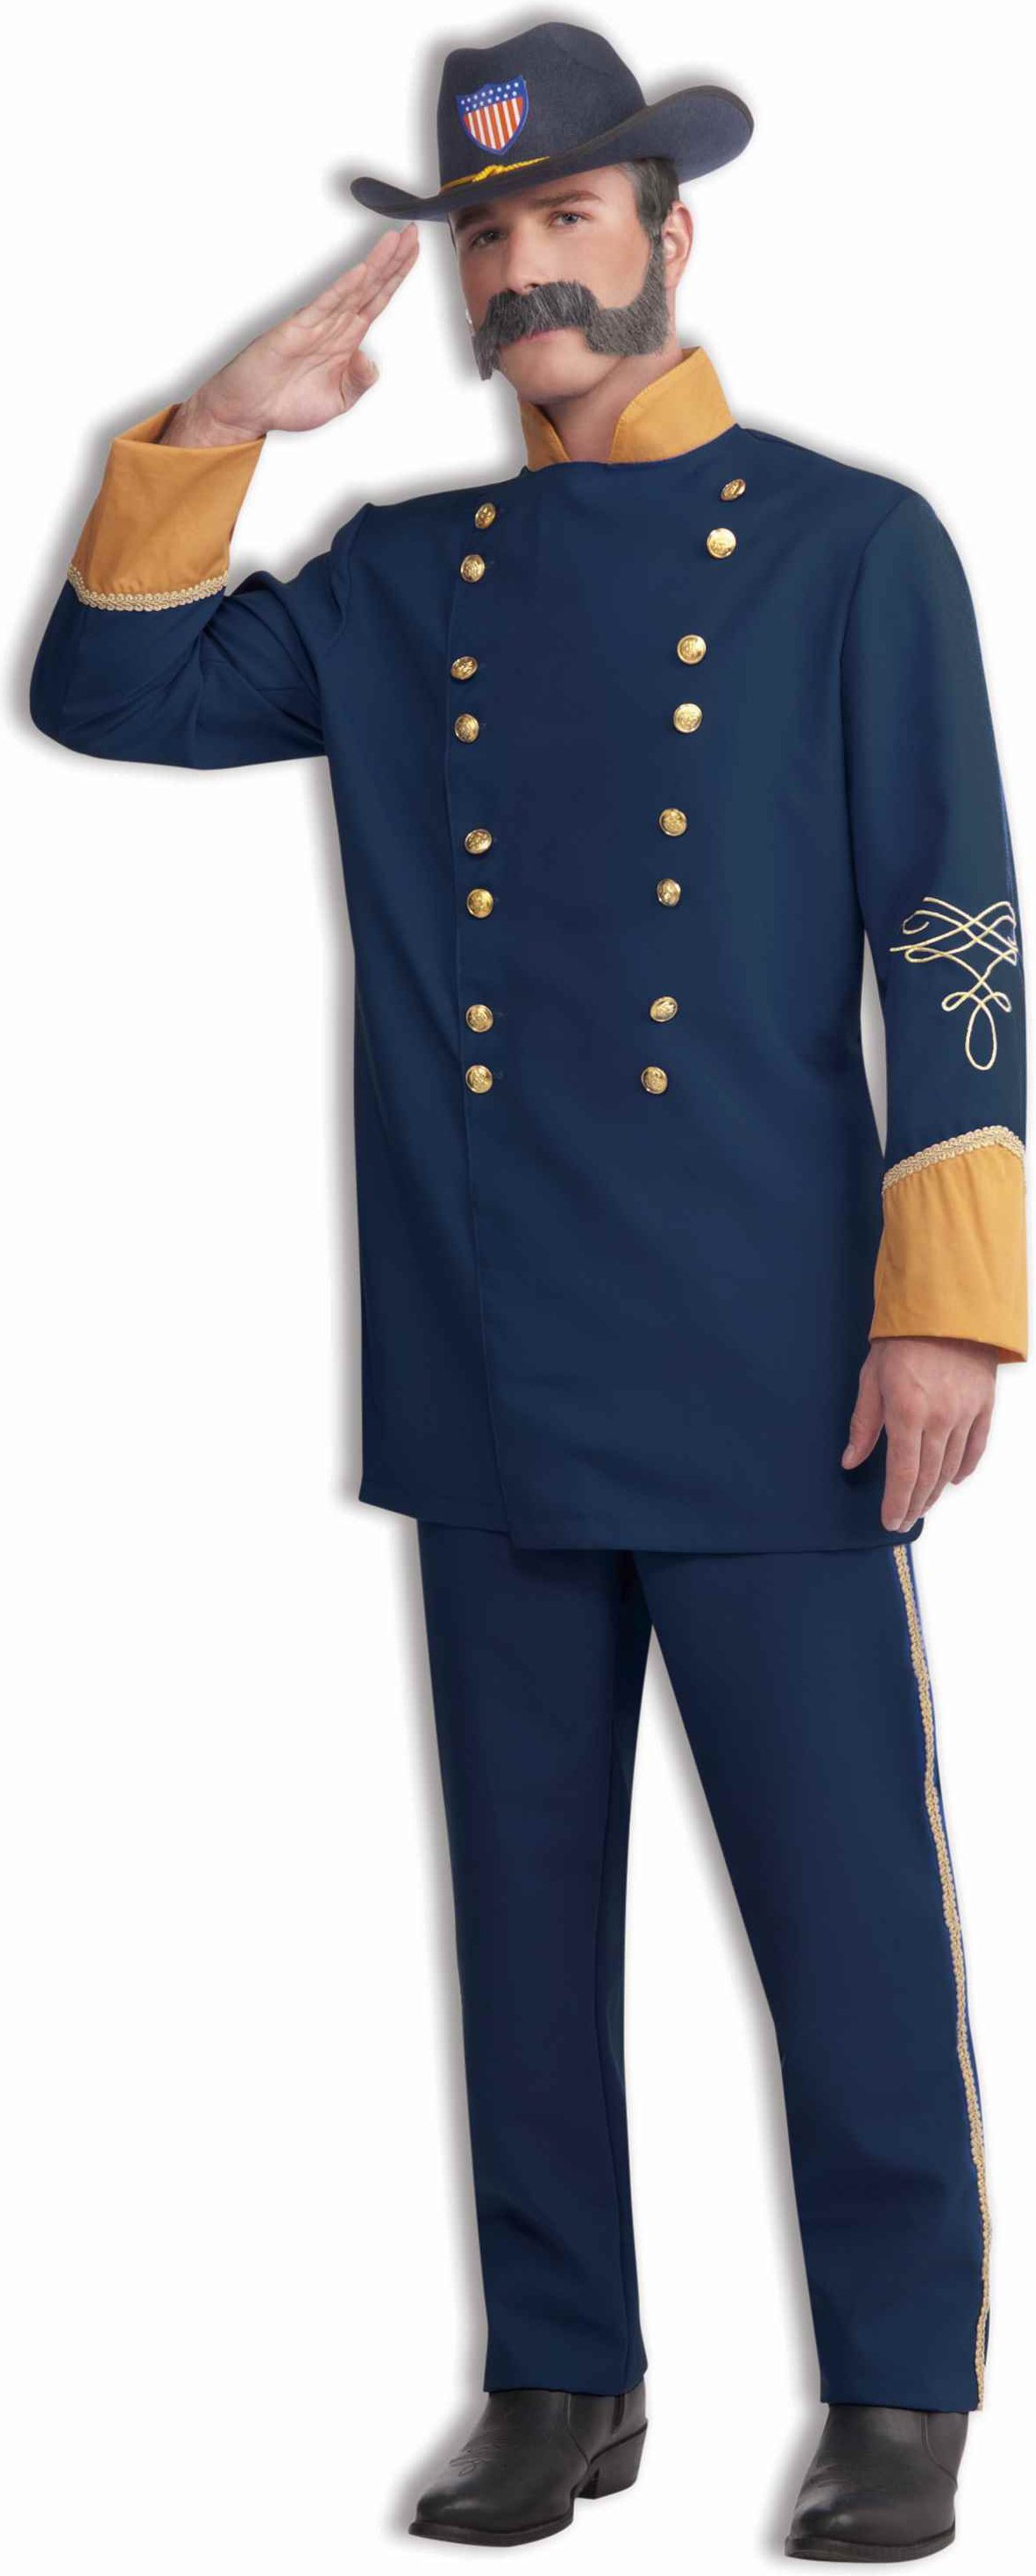 Union Officer Adult Costume - Click Image to Close